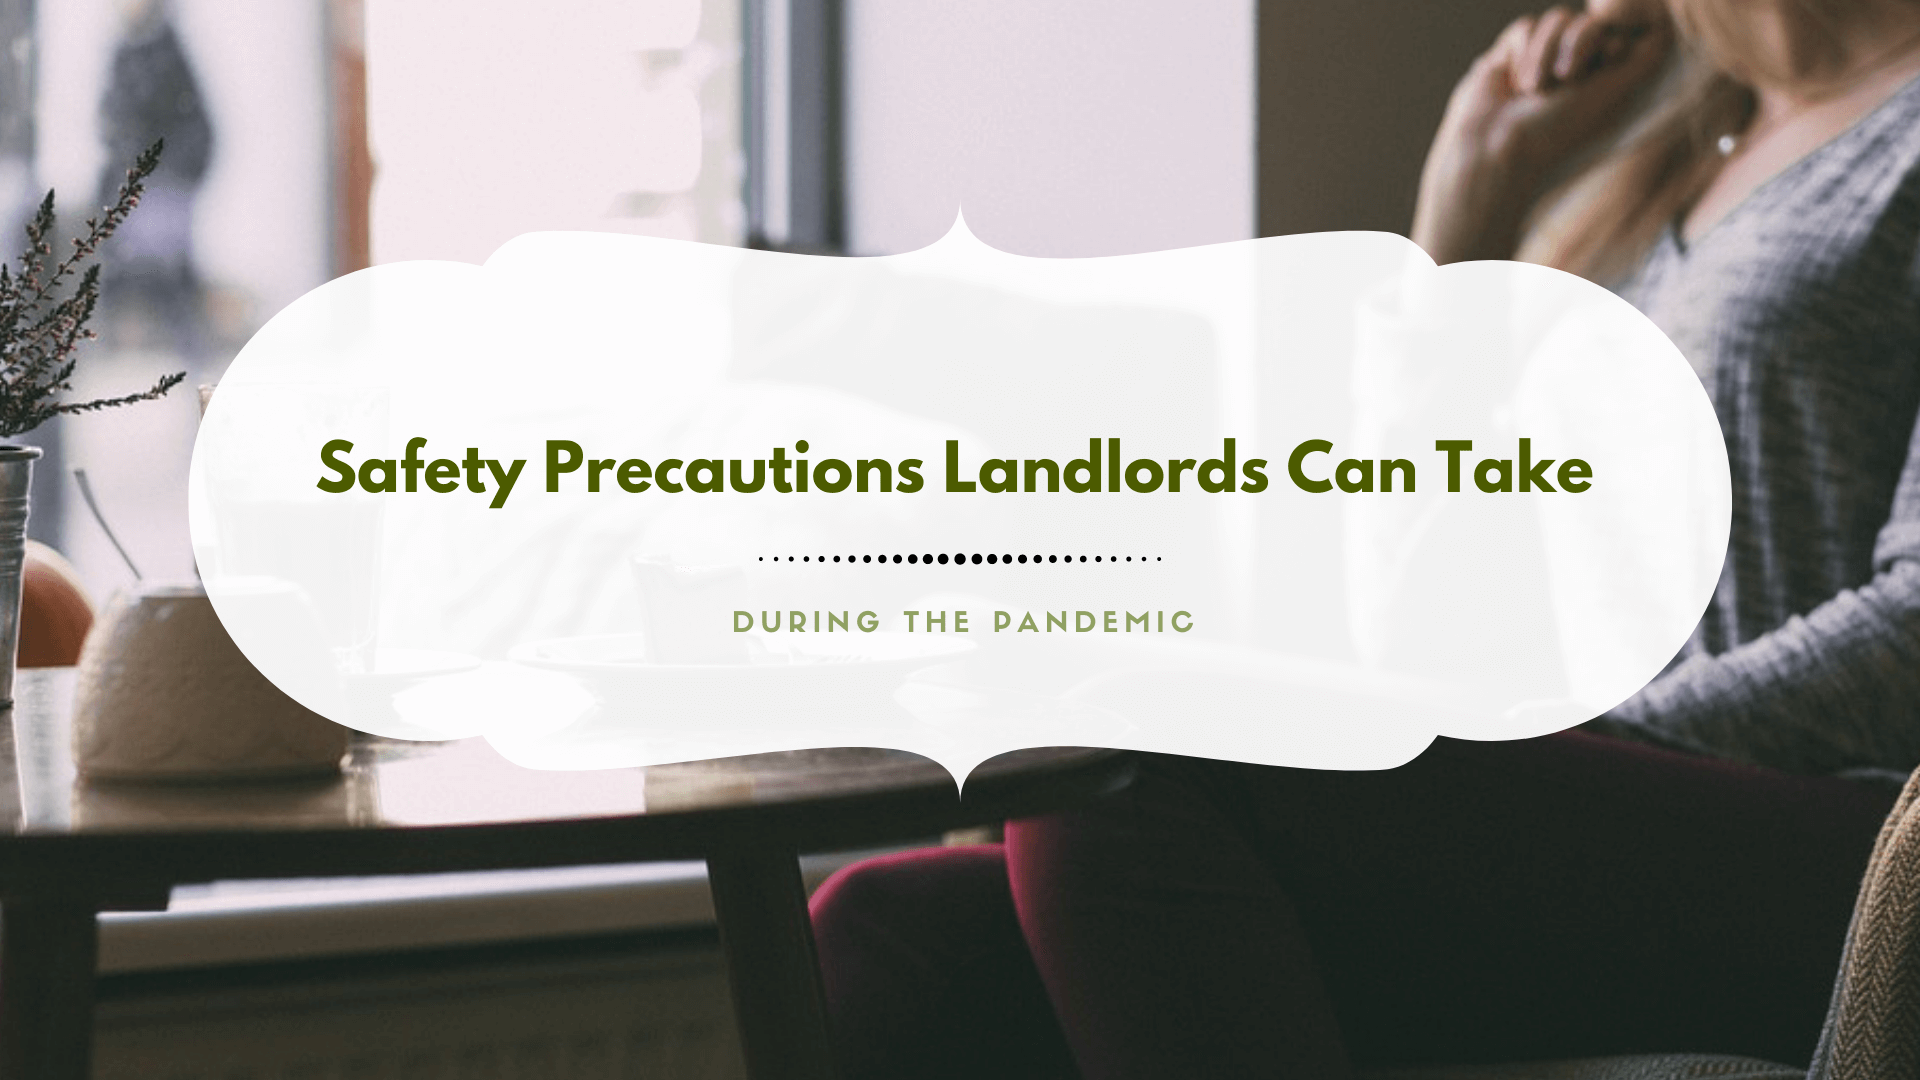 Safety Precautions Oakland Landlords Can Take During the Pandemic